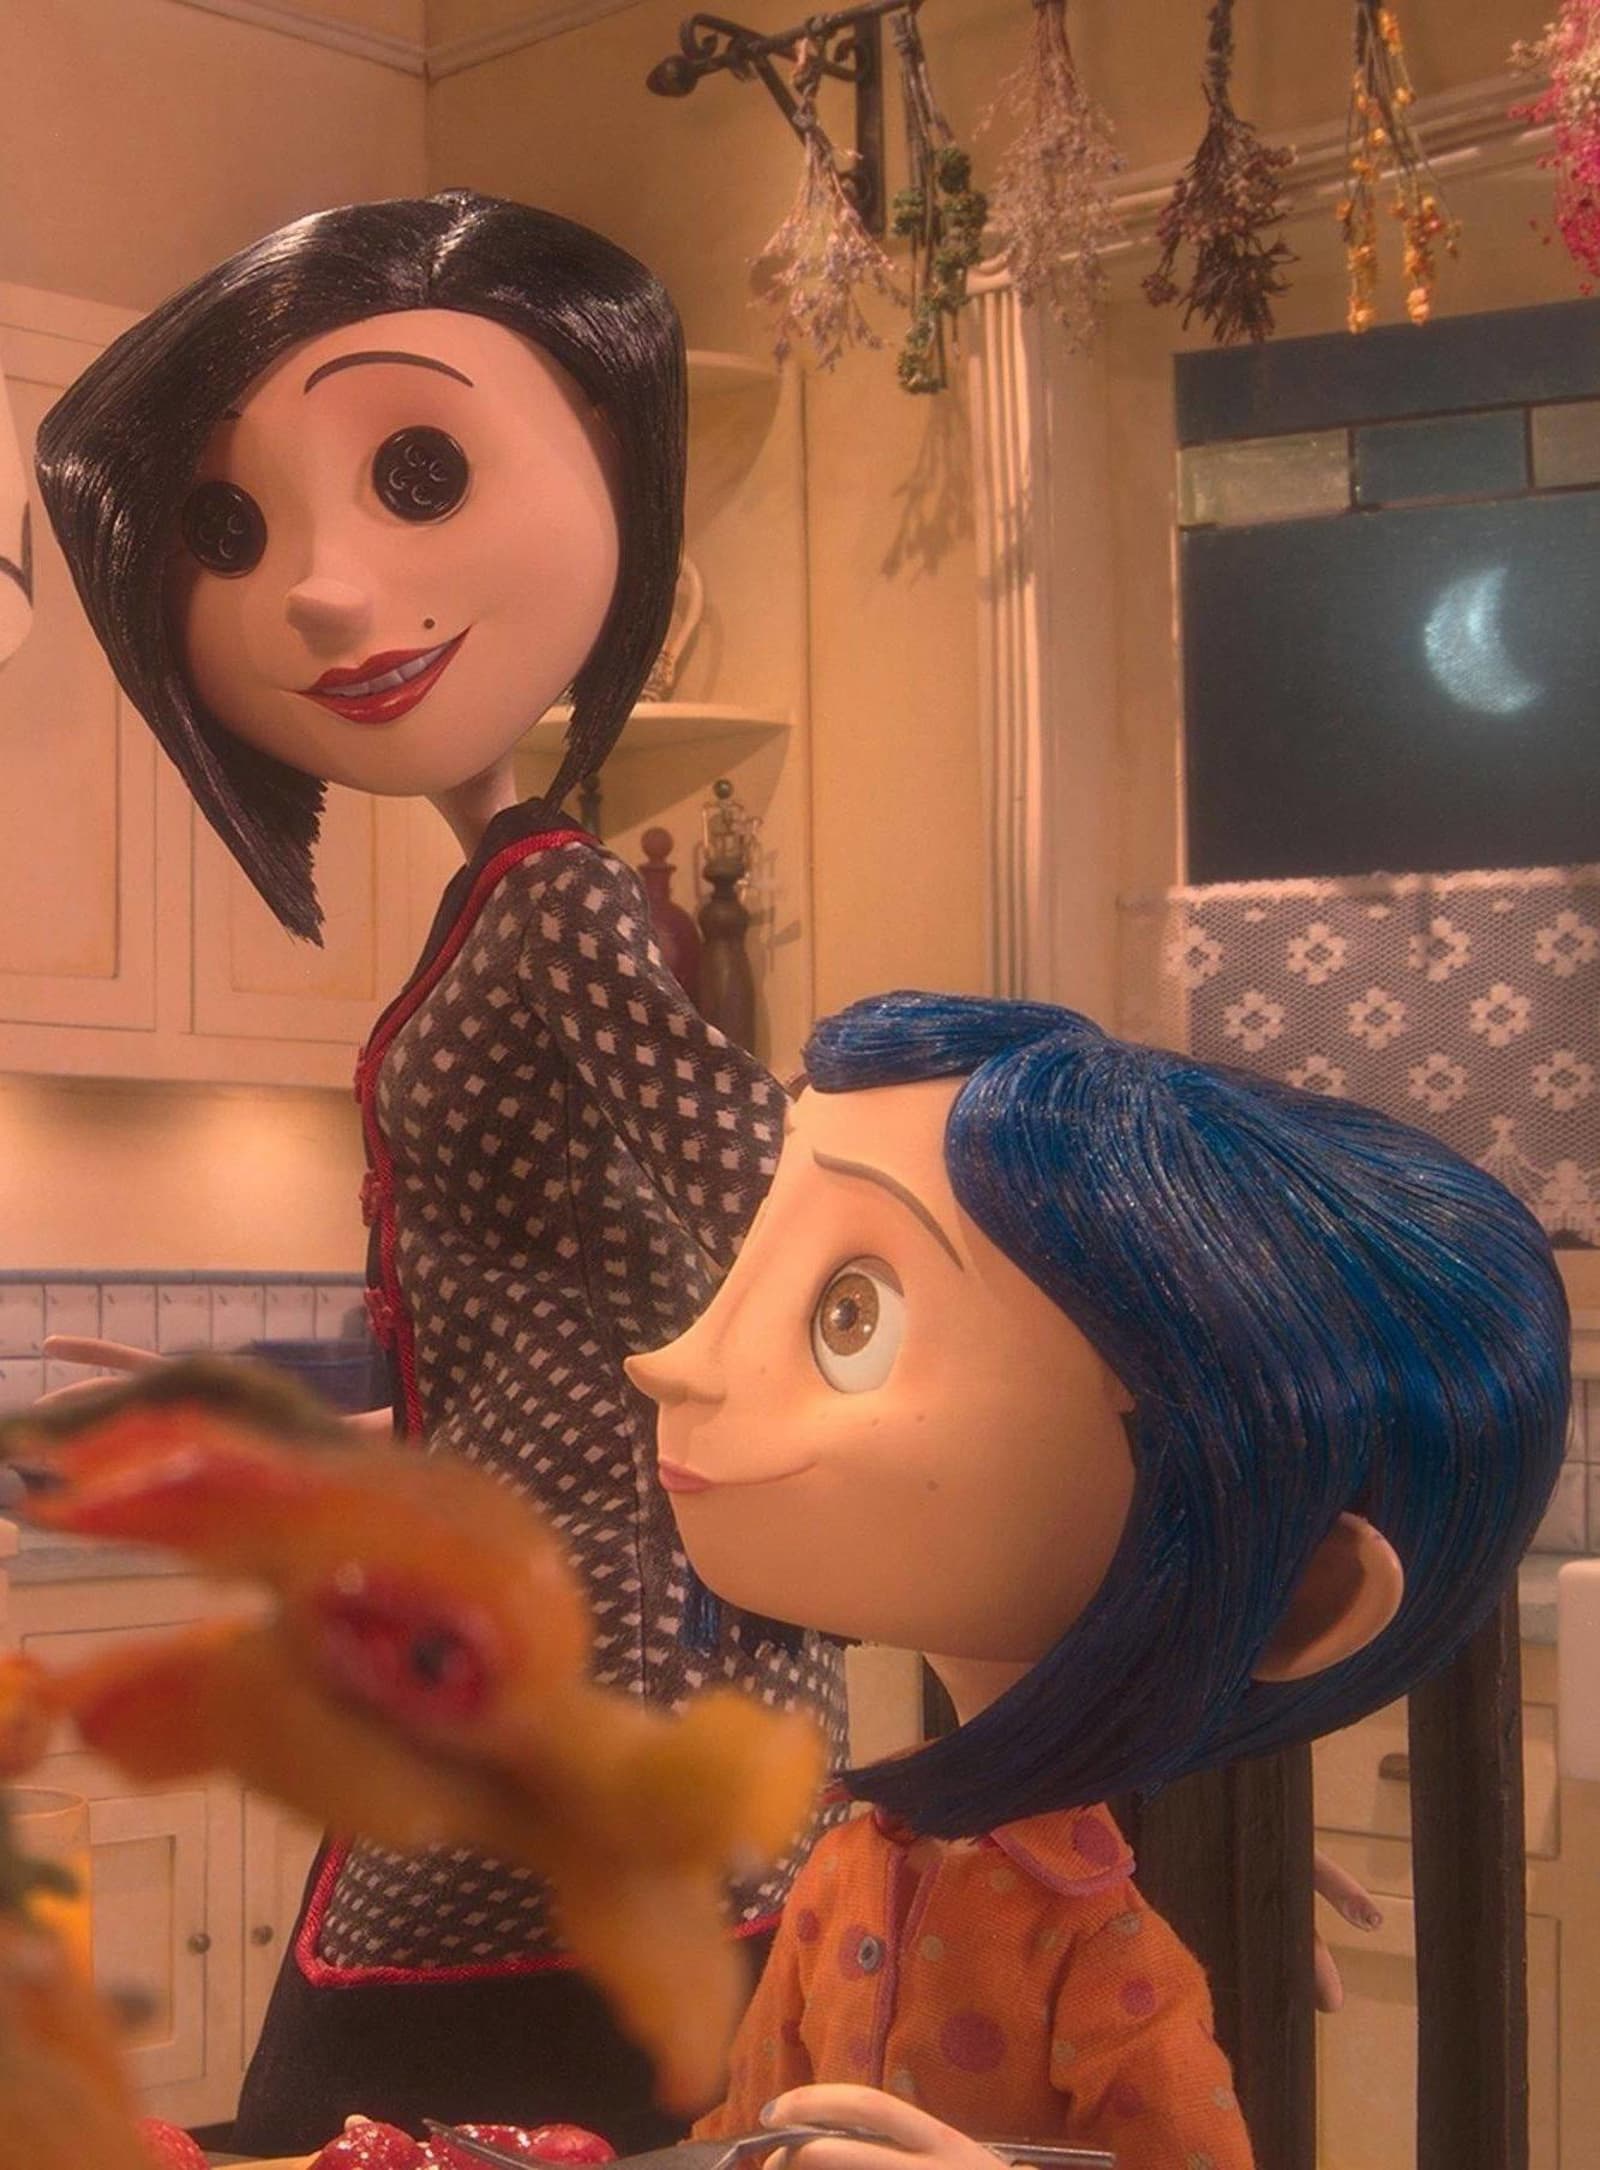 The Best Stop-Motion Animation Movies